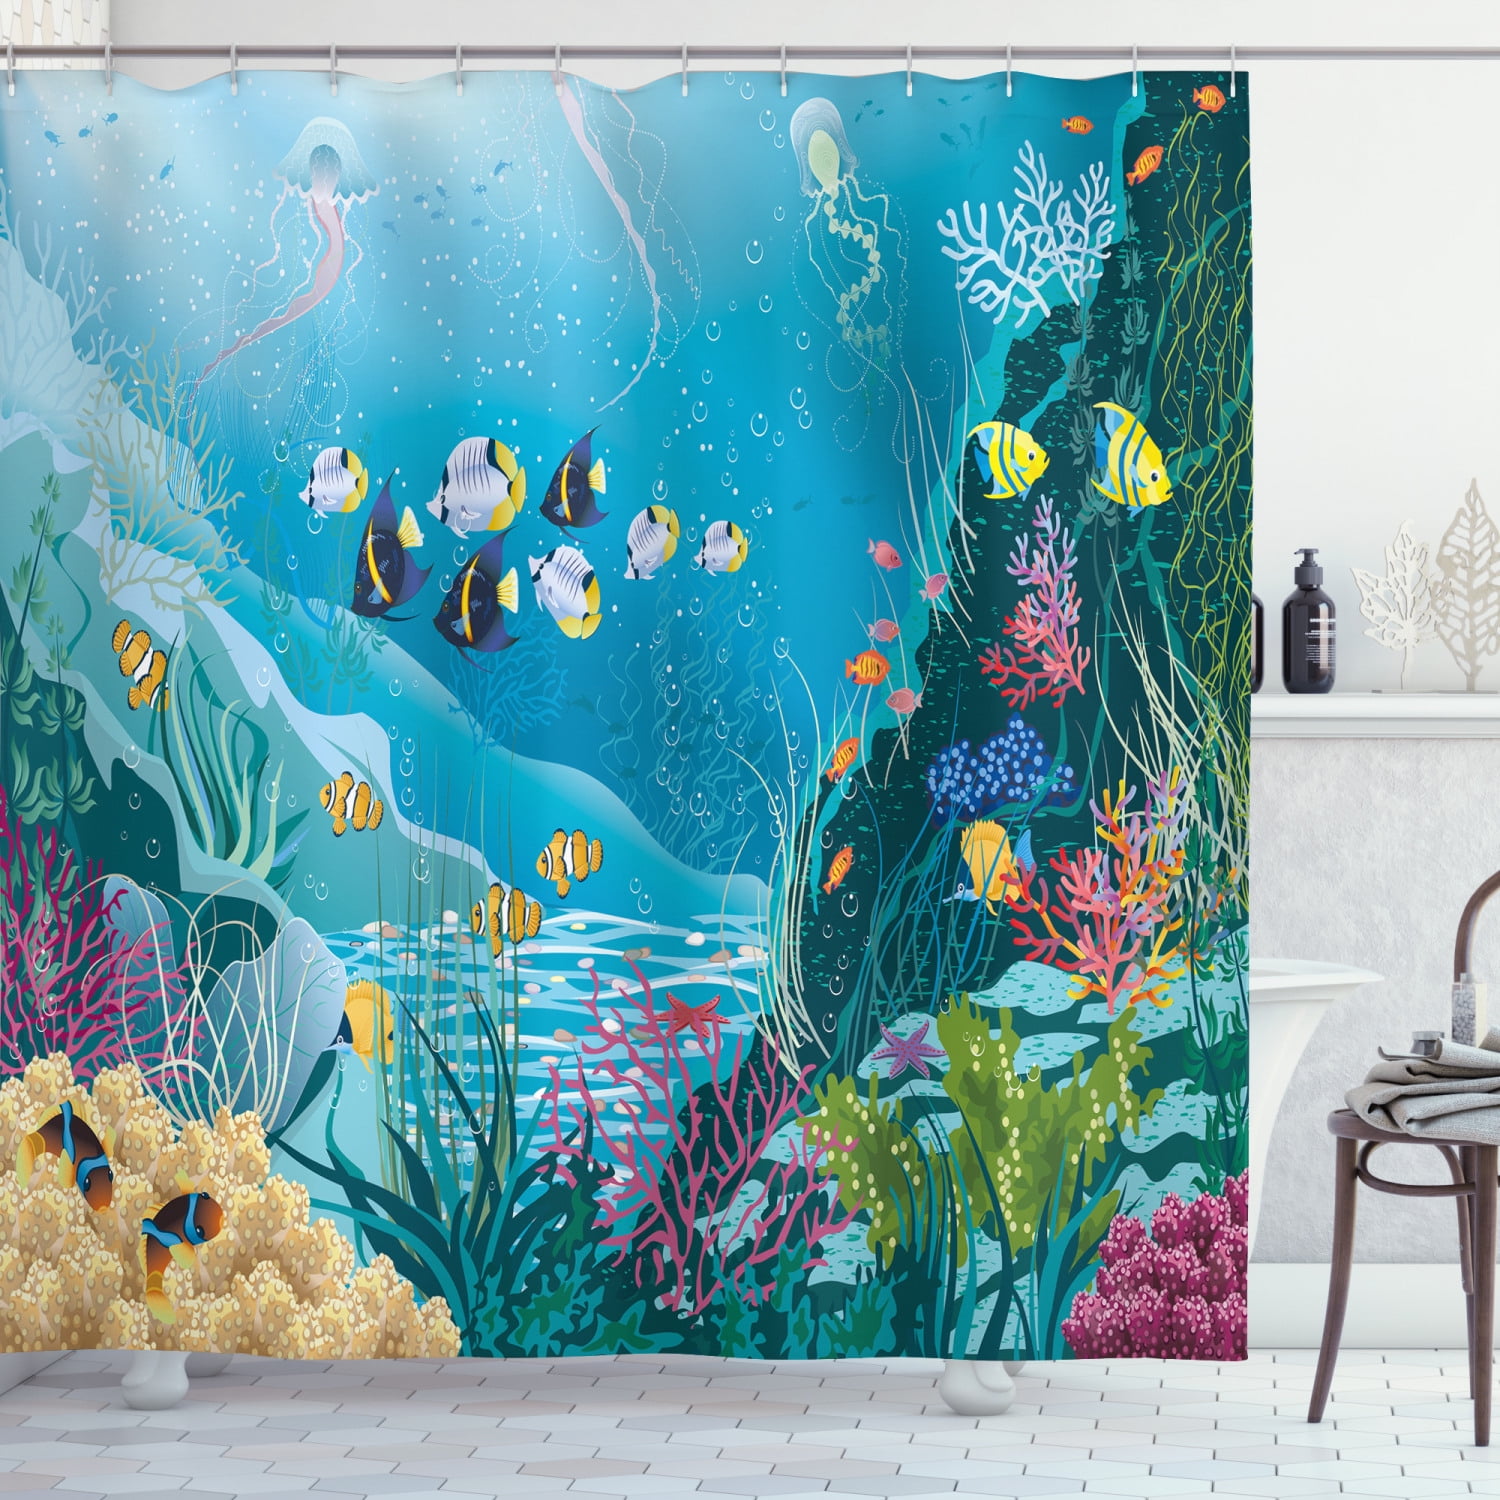 Undersea Tropical Fish Shower Curtain Liner Bathroom Set Polyester Fabric Hooks 